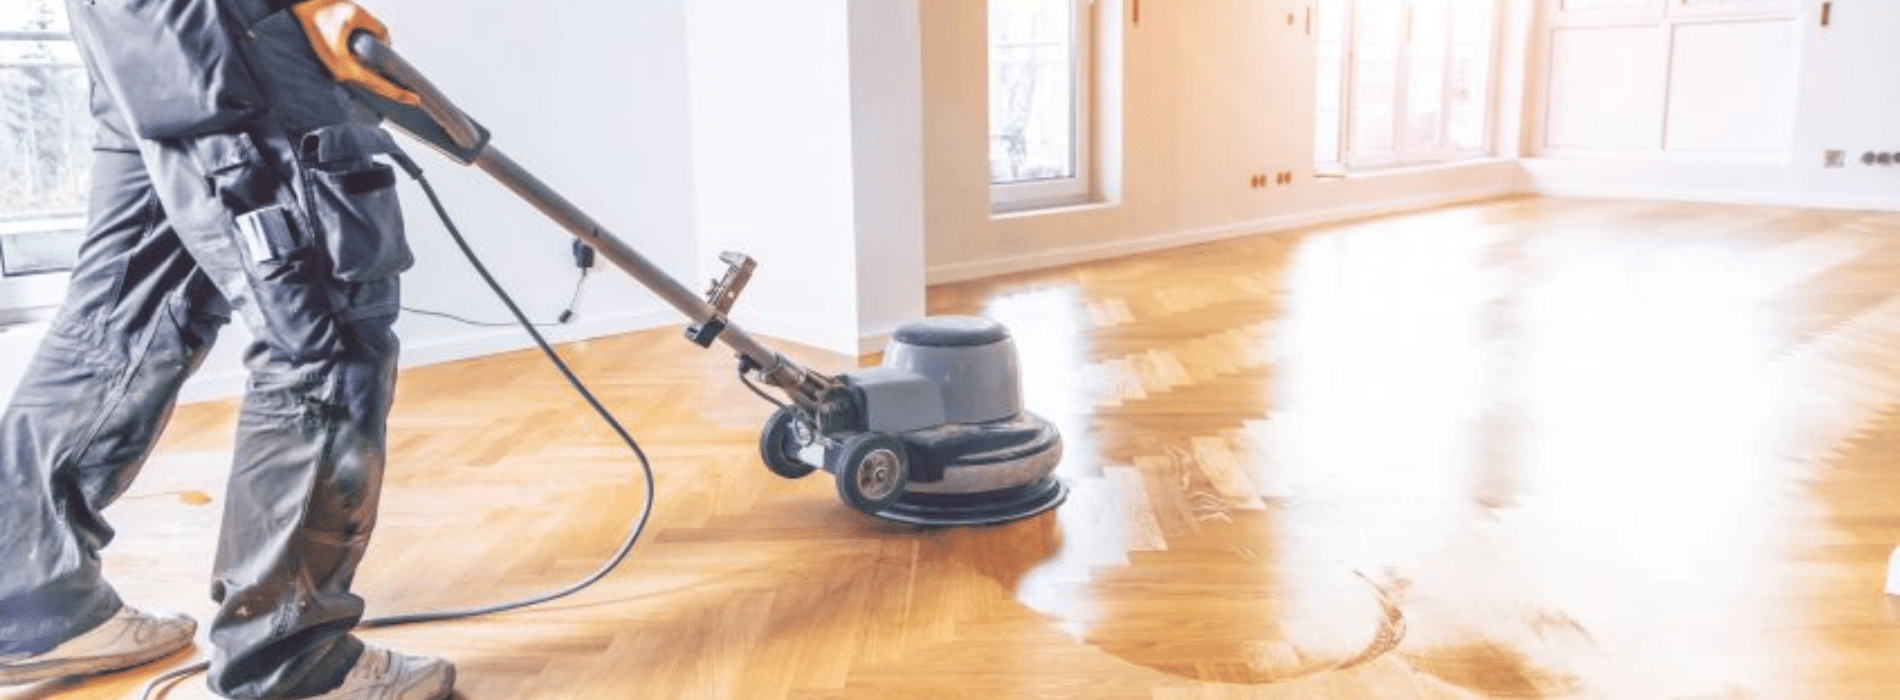 In Chinatown, W1, Mr Sander® are using a Bona FlexiSand 1.5, a powerful floor buffer sander with a Ø 407 mm dimension and 1.5 kW effect. Operating at 230V and 50 Hz/60 Hz, it's connected to a dust extraction system equipped with a HEPA filter for optimal cleanliness and efficiency during the sanding of a parquet floor.